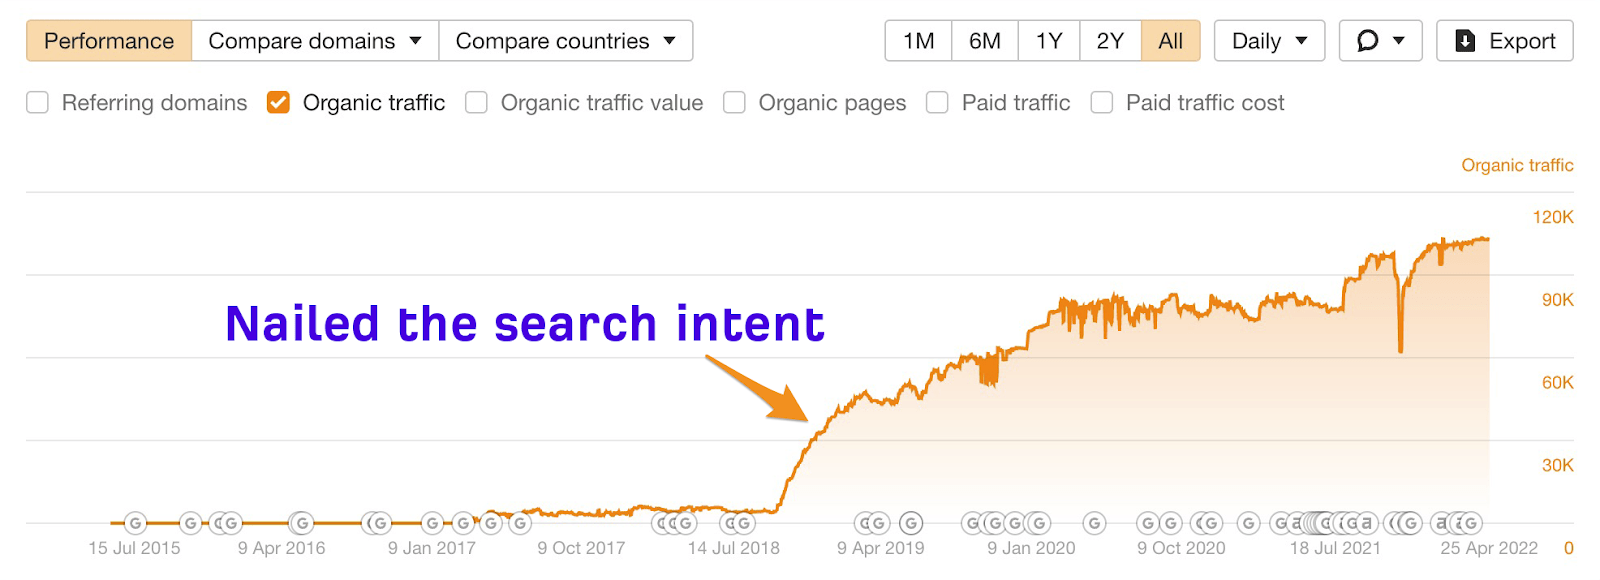 Organic traffic for our 